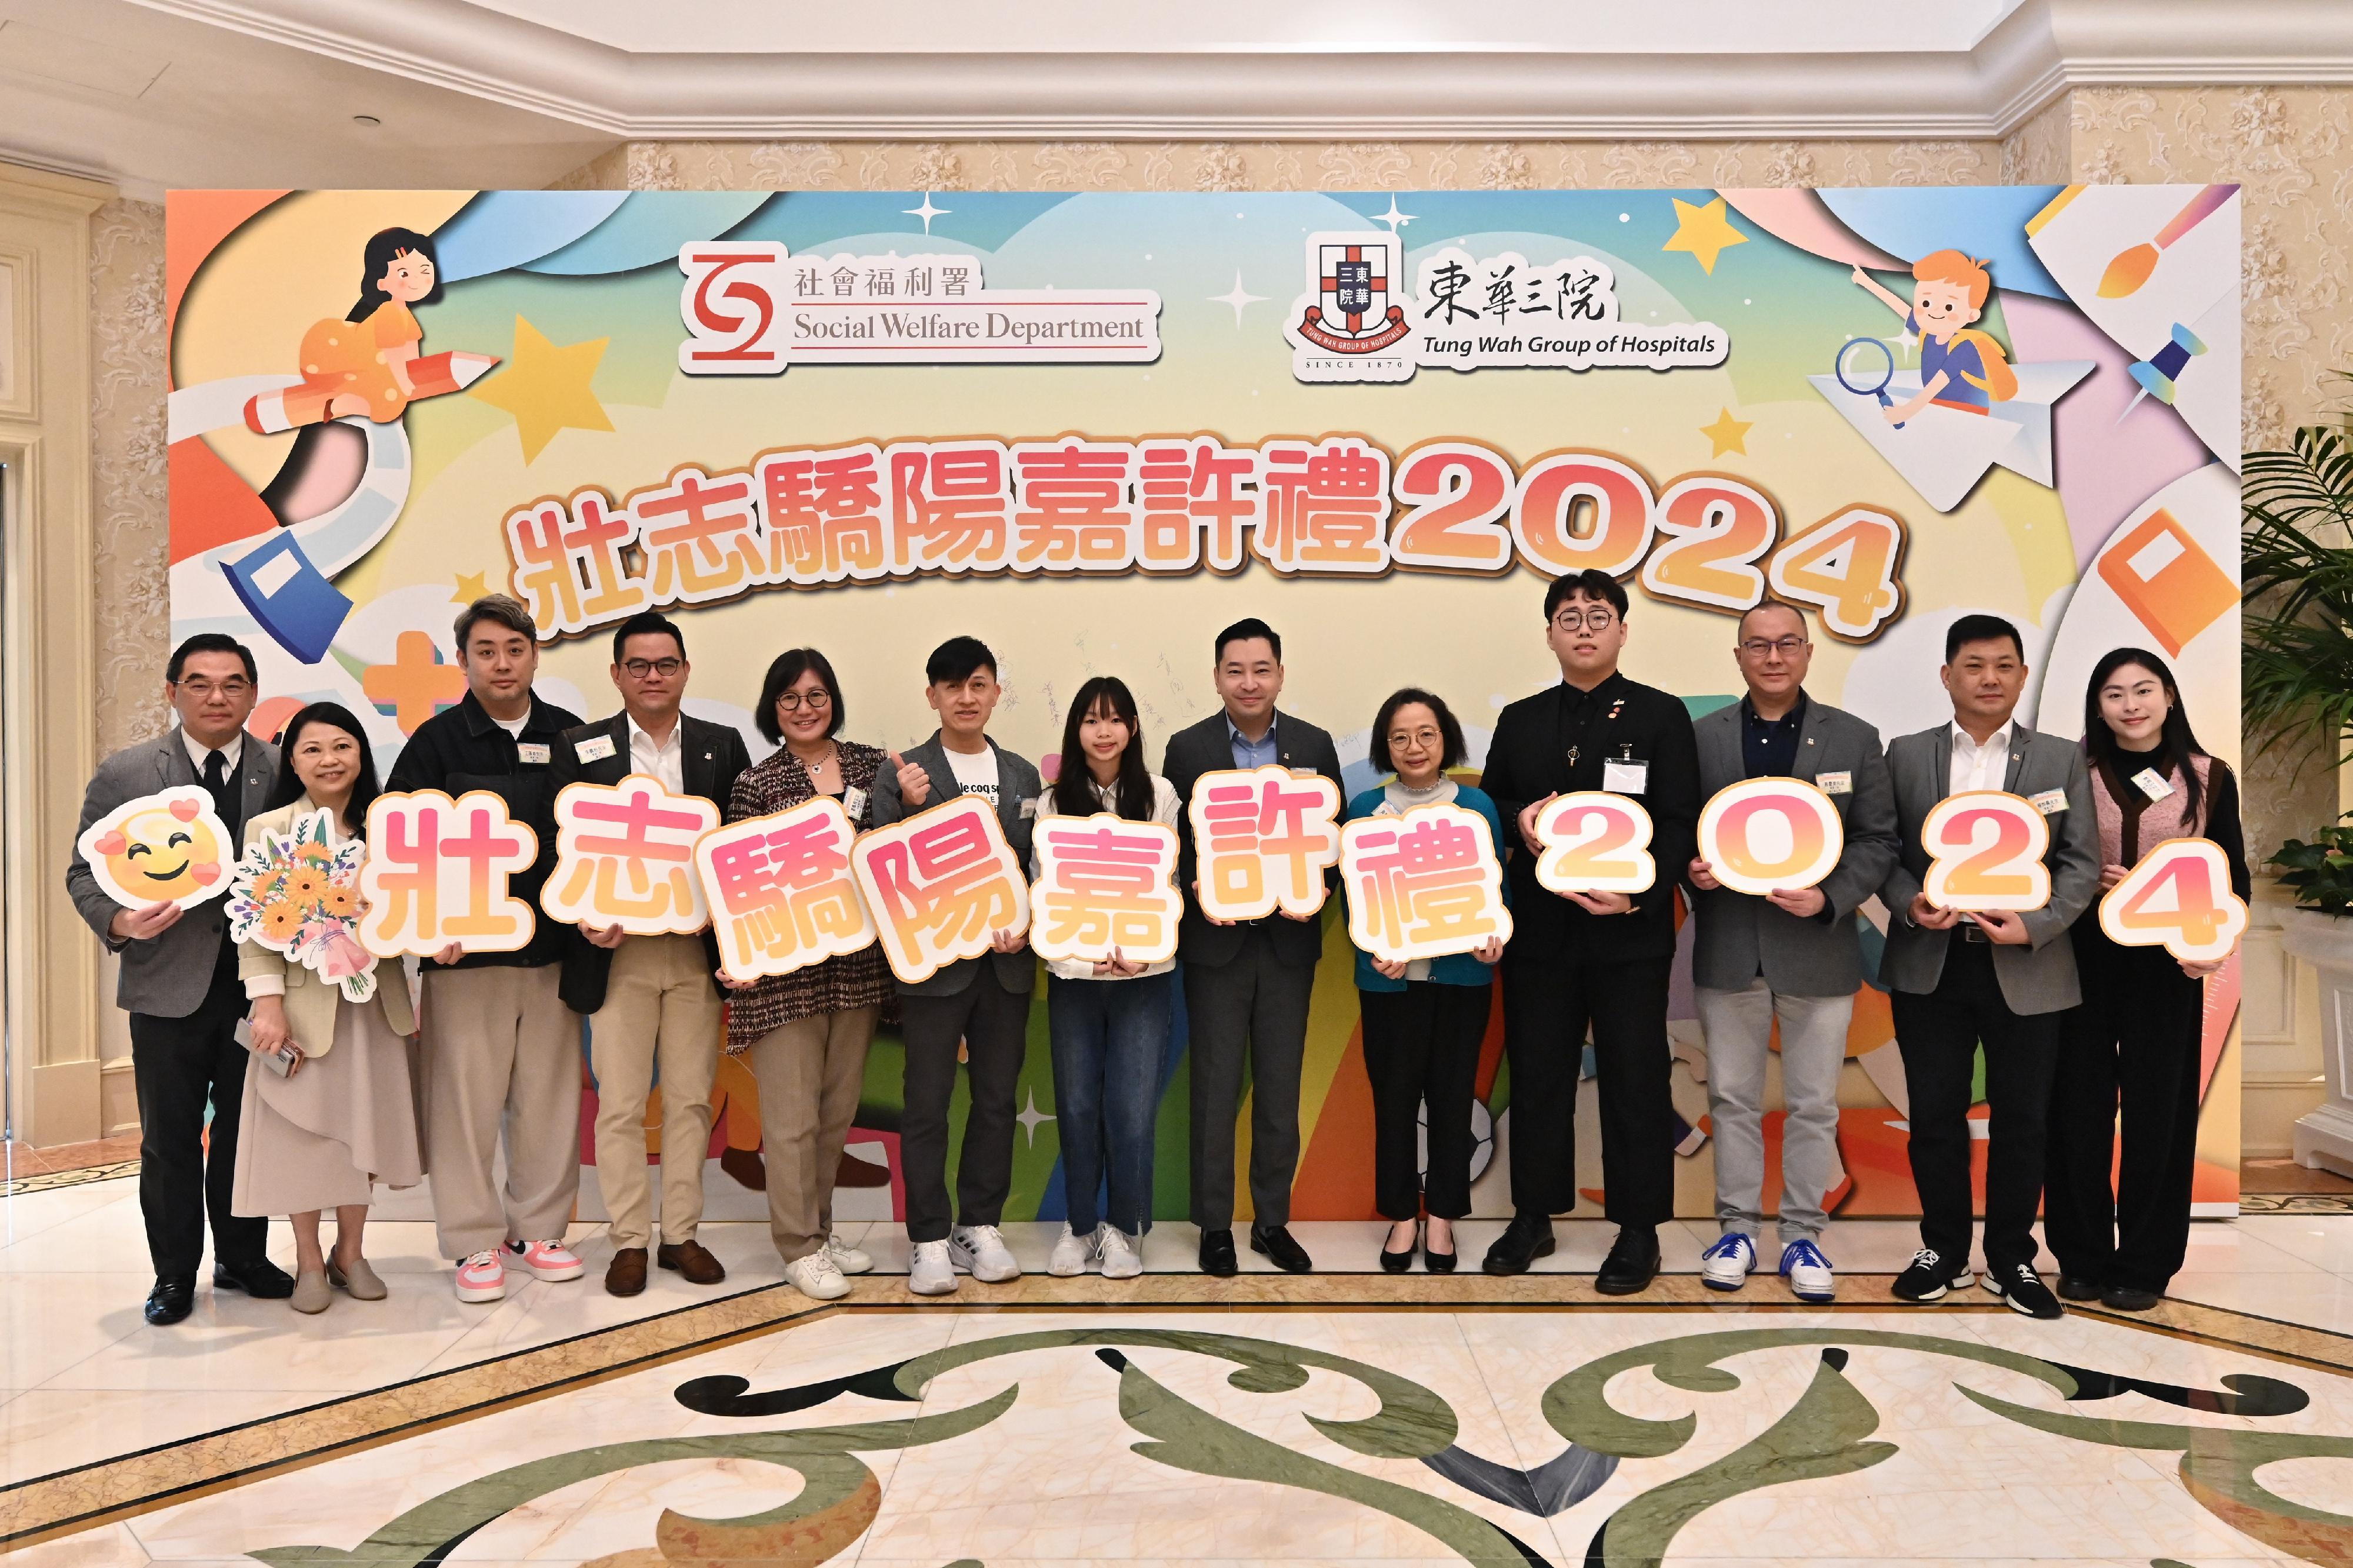 The Social Welfare Department co-organised the 2024 Award Presentation Ceremony for Director of Social Welfare (DSW) wards with the Tung Wah Group of Hospitals (TWGHs) today (March 16). Photo shows the Acting DSW, Ms Wong Yin-yee (fifth right), and the Chairman of the Board of Directors of the TWGHs, Mr Herman Wai (sixth right), in a group photo with other guests and some awardees.